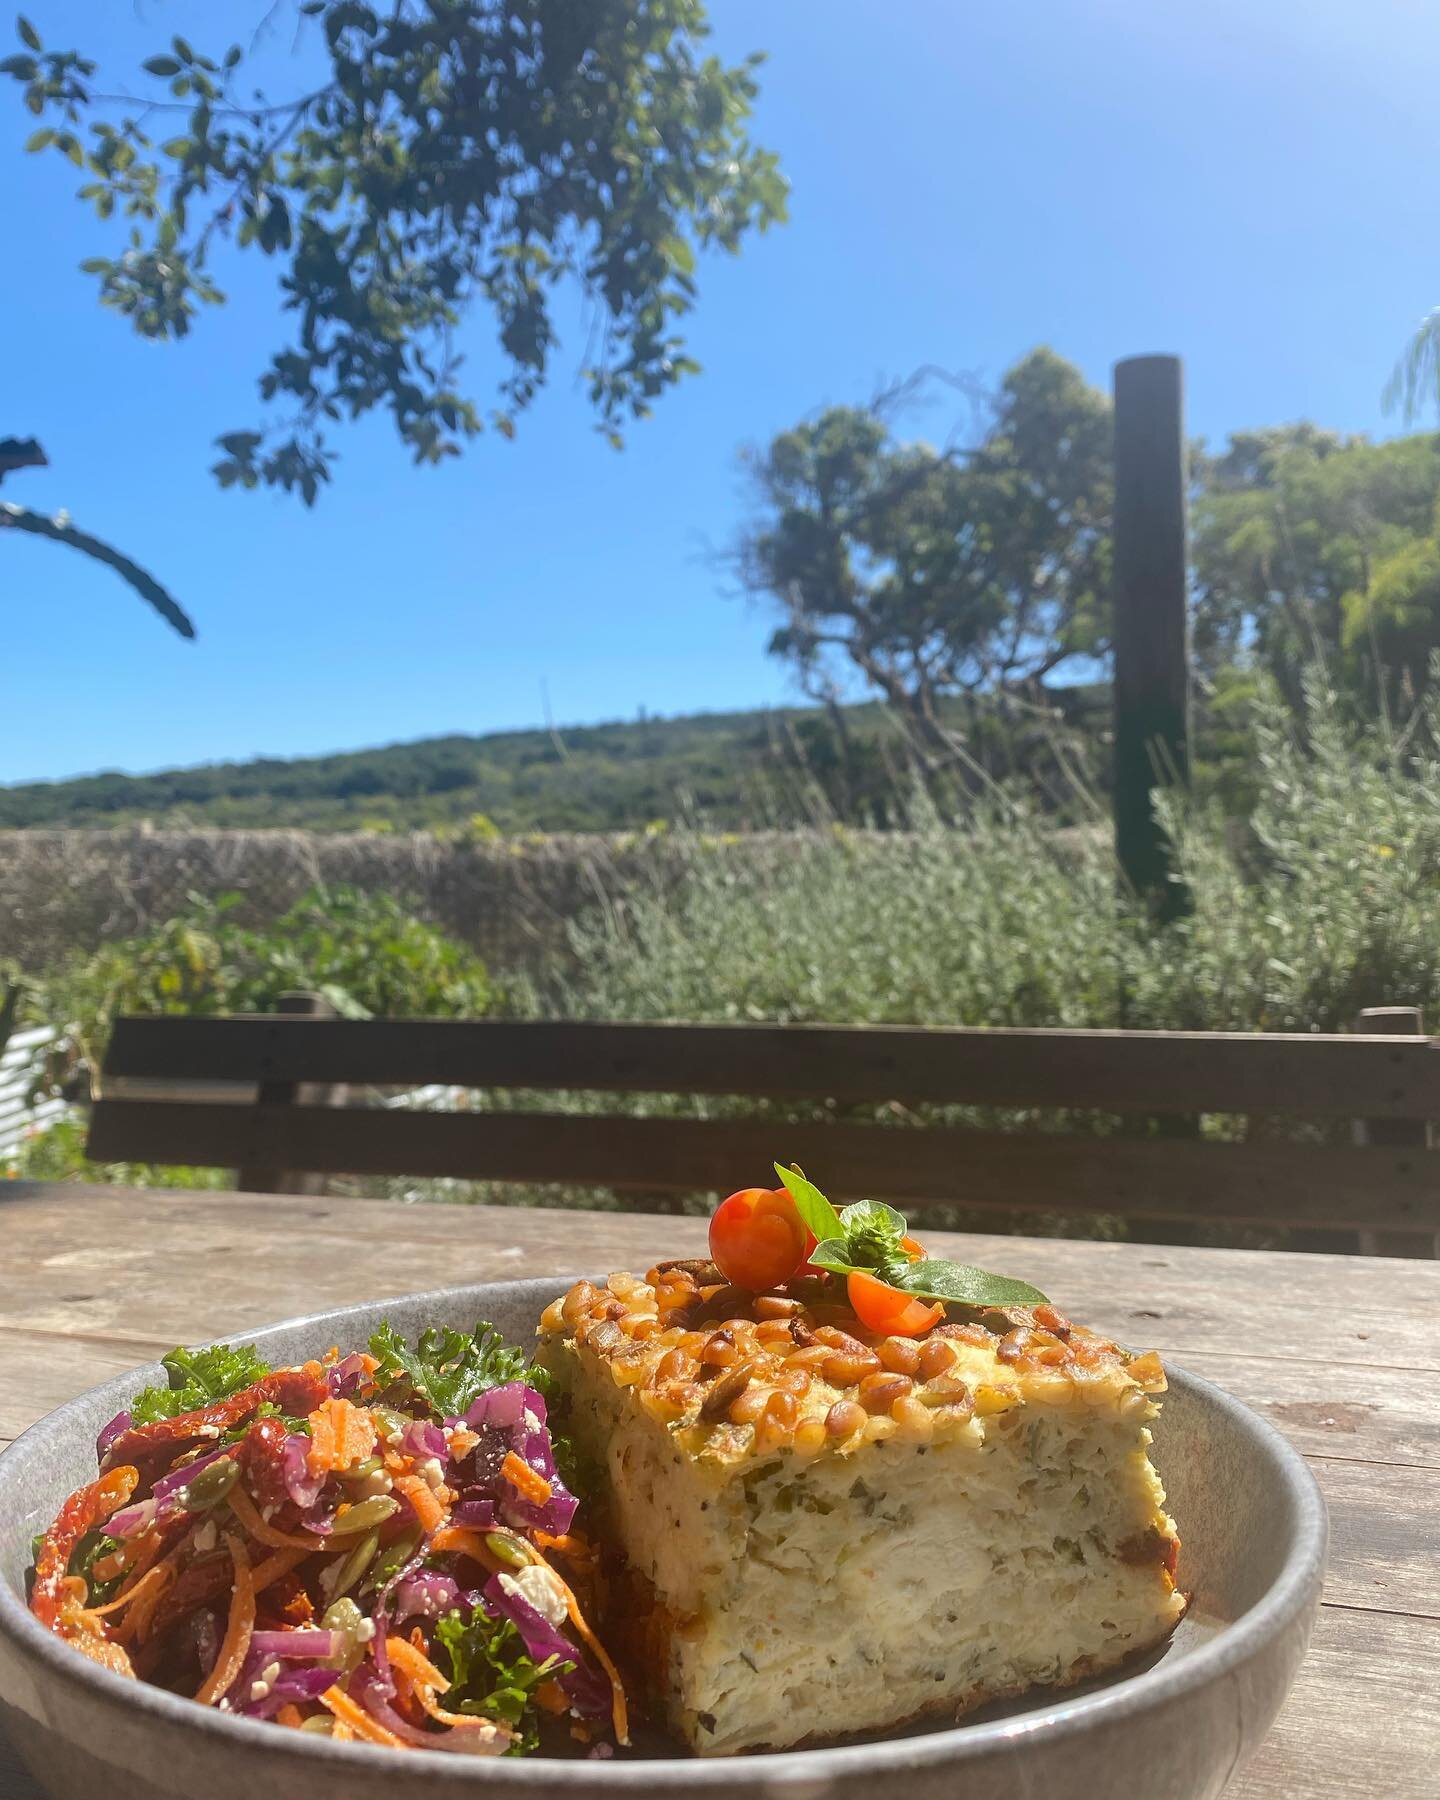 Vegetarian frittata with a side of kale slaw salad ! Yum